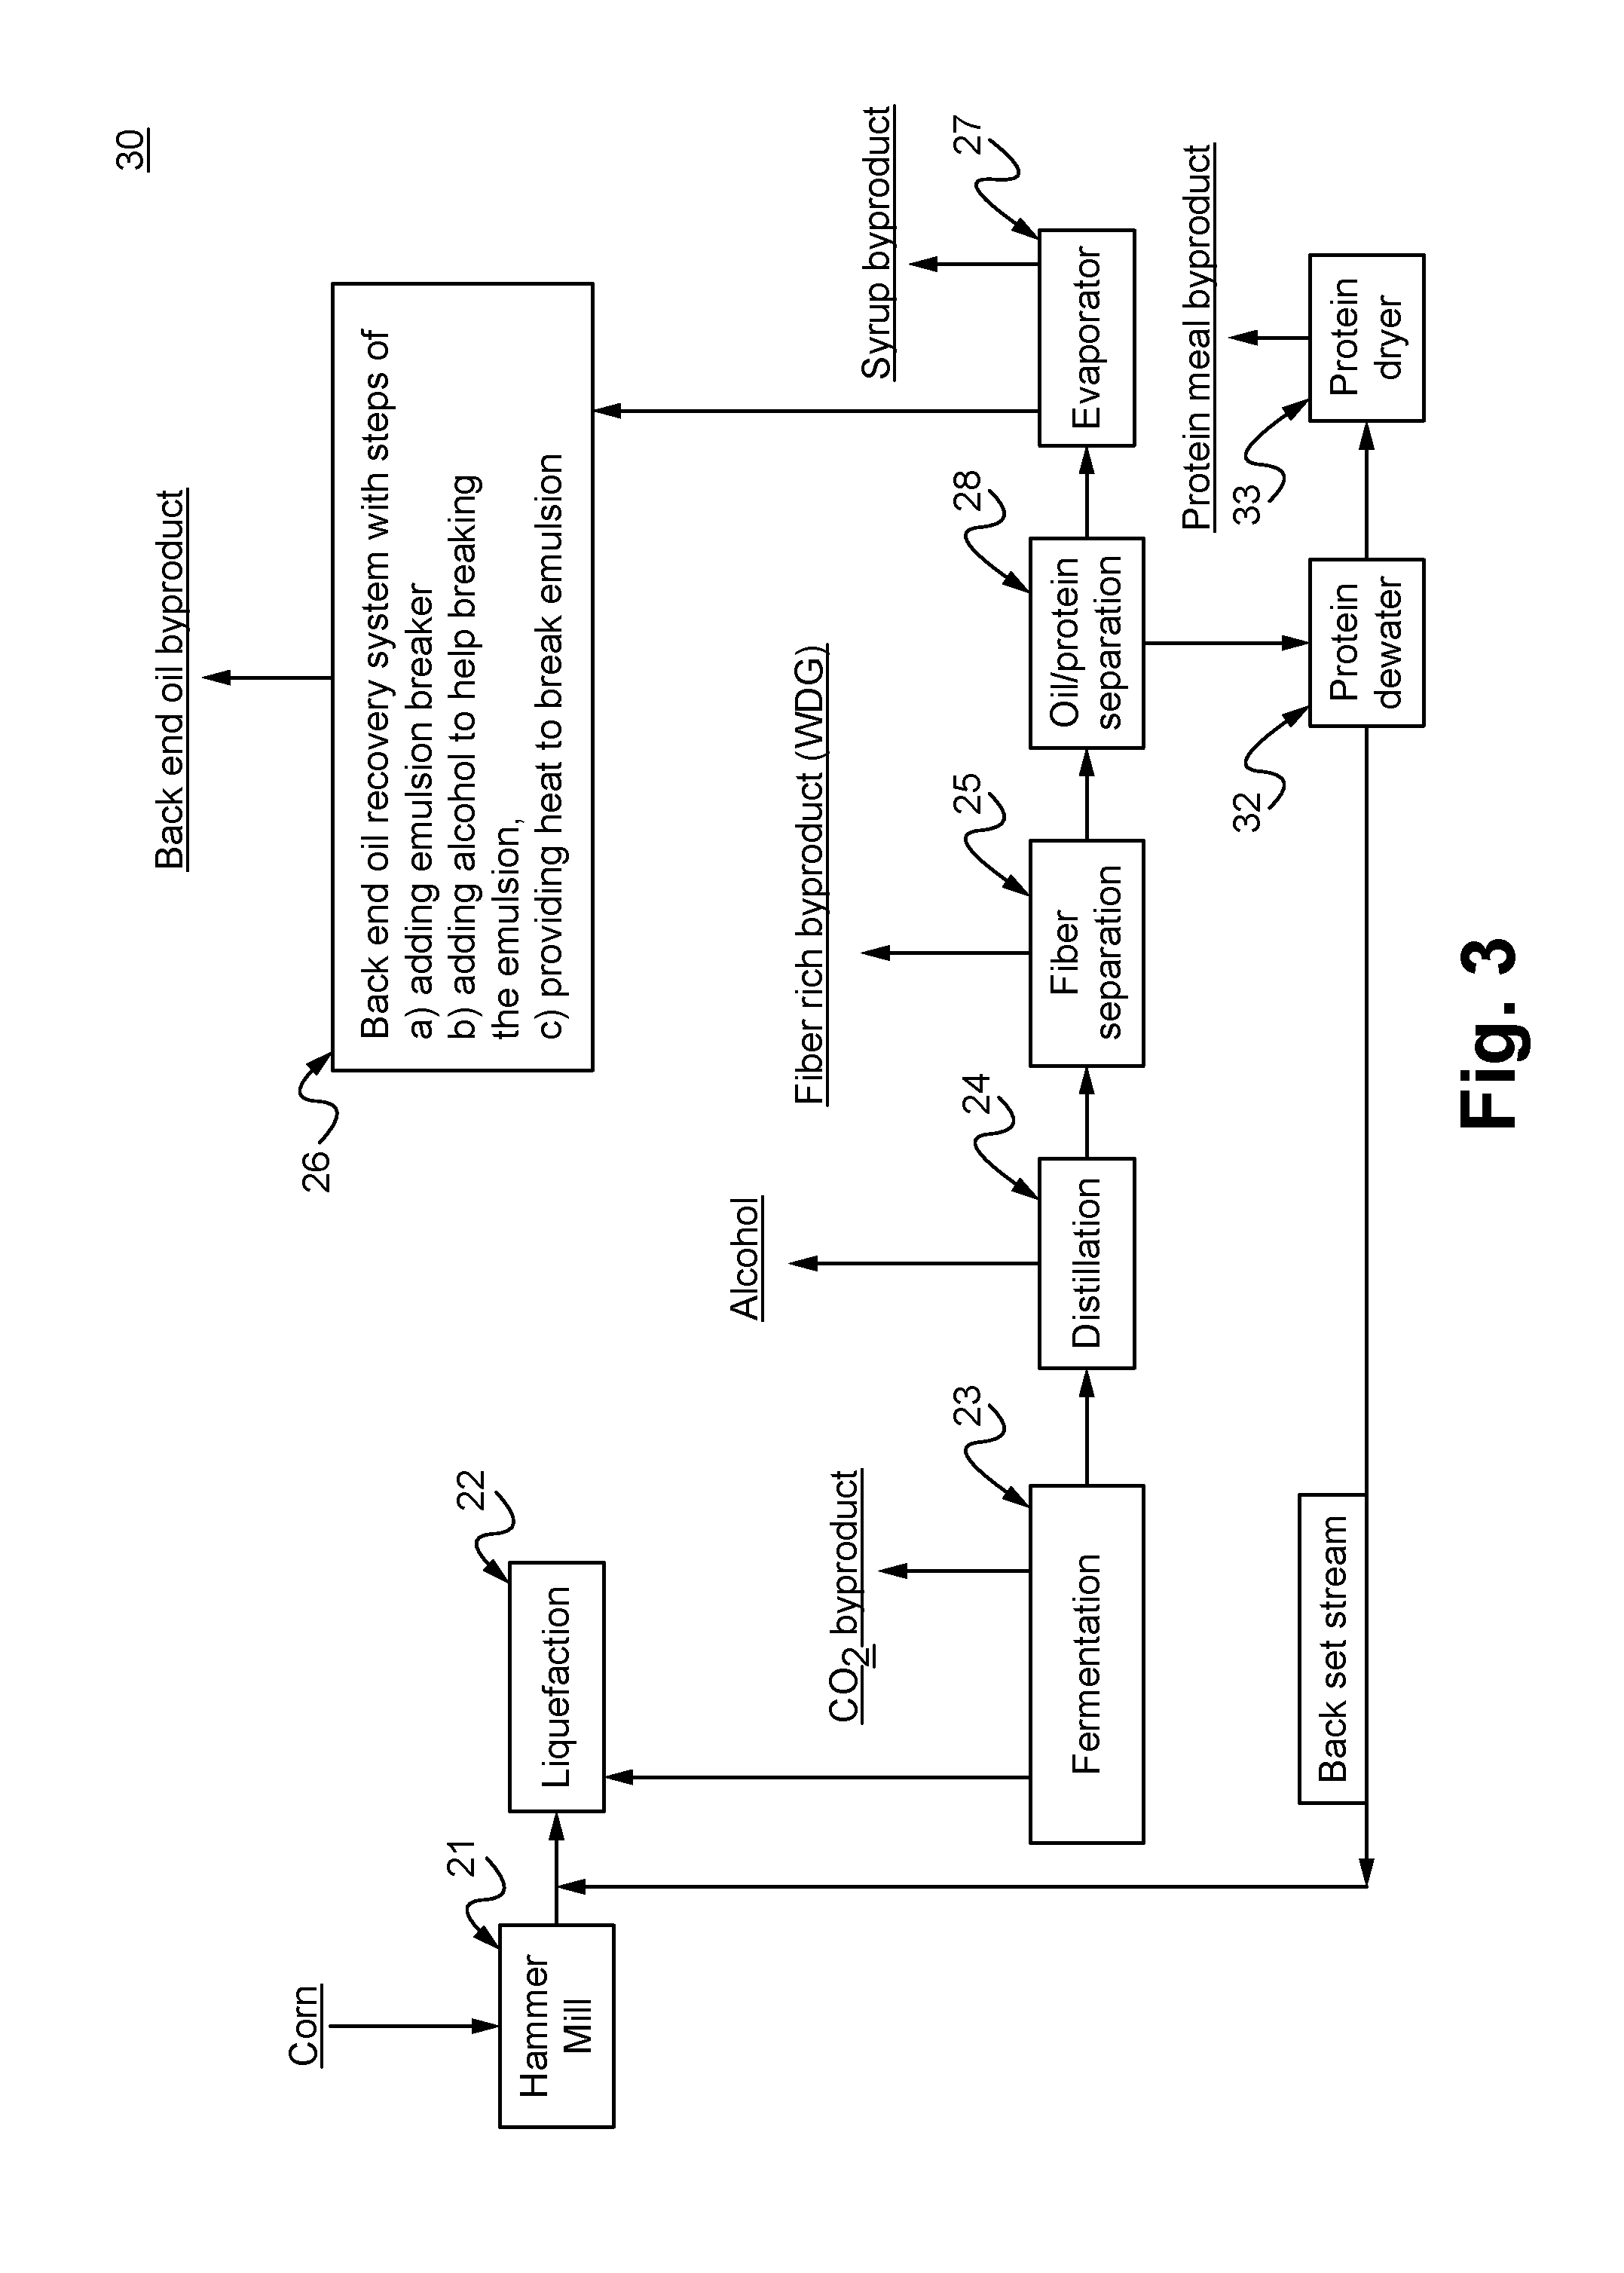 Method of and system for producing a high value animal feed additive from a stillage in an alcohol production process